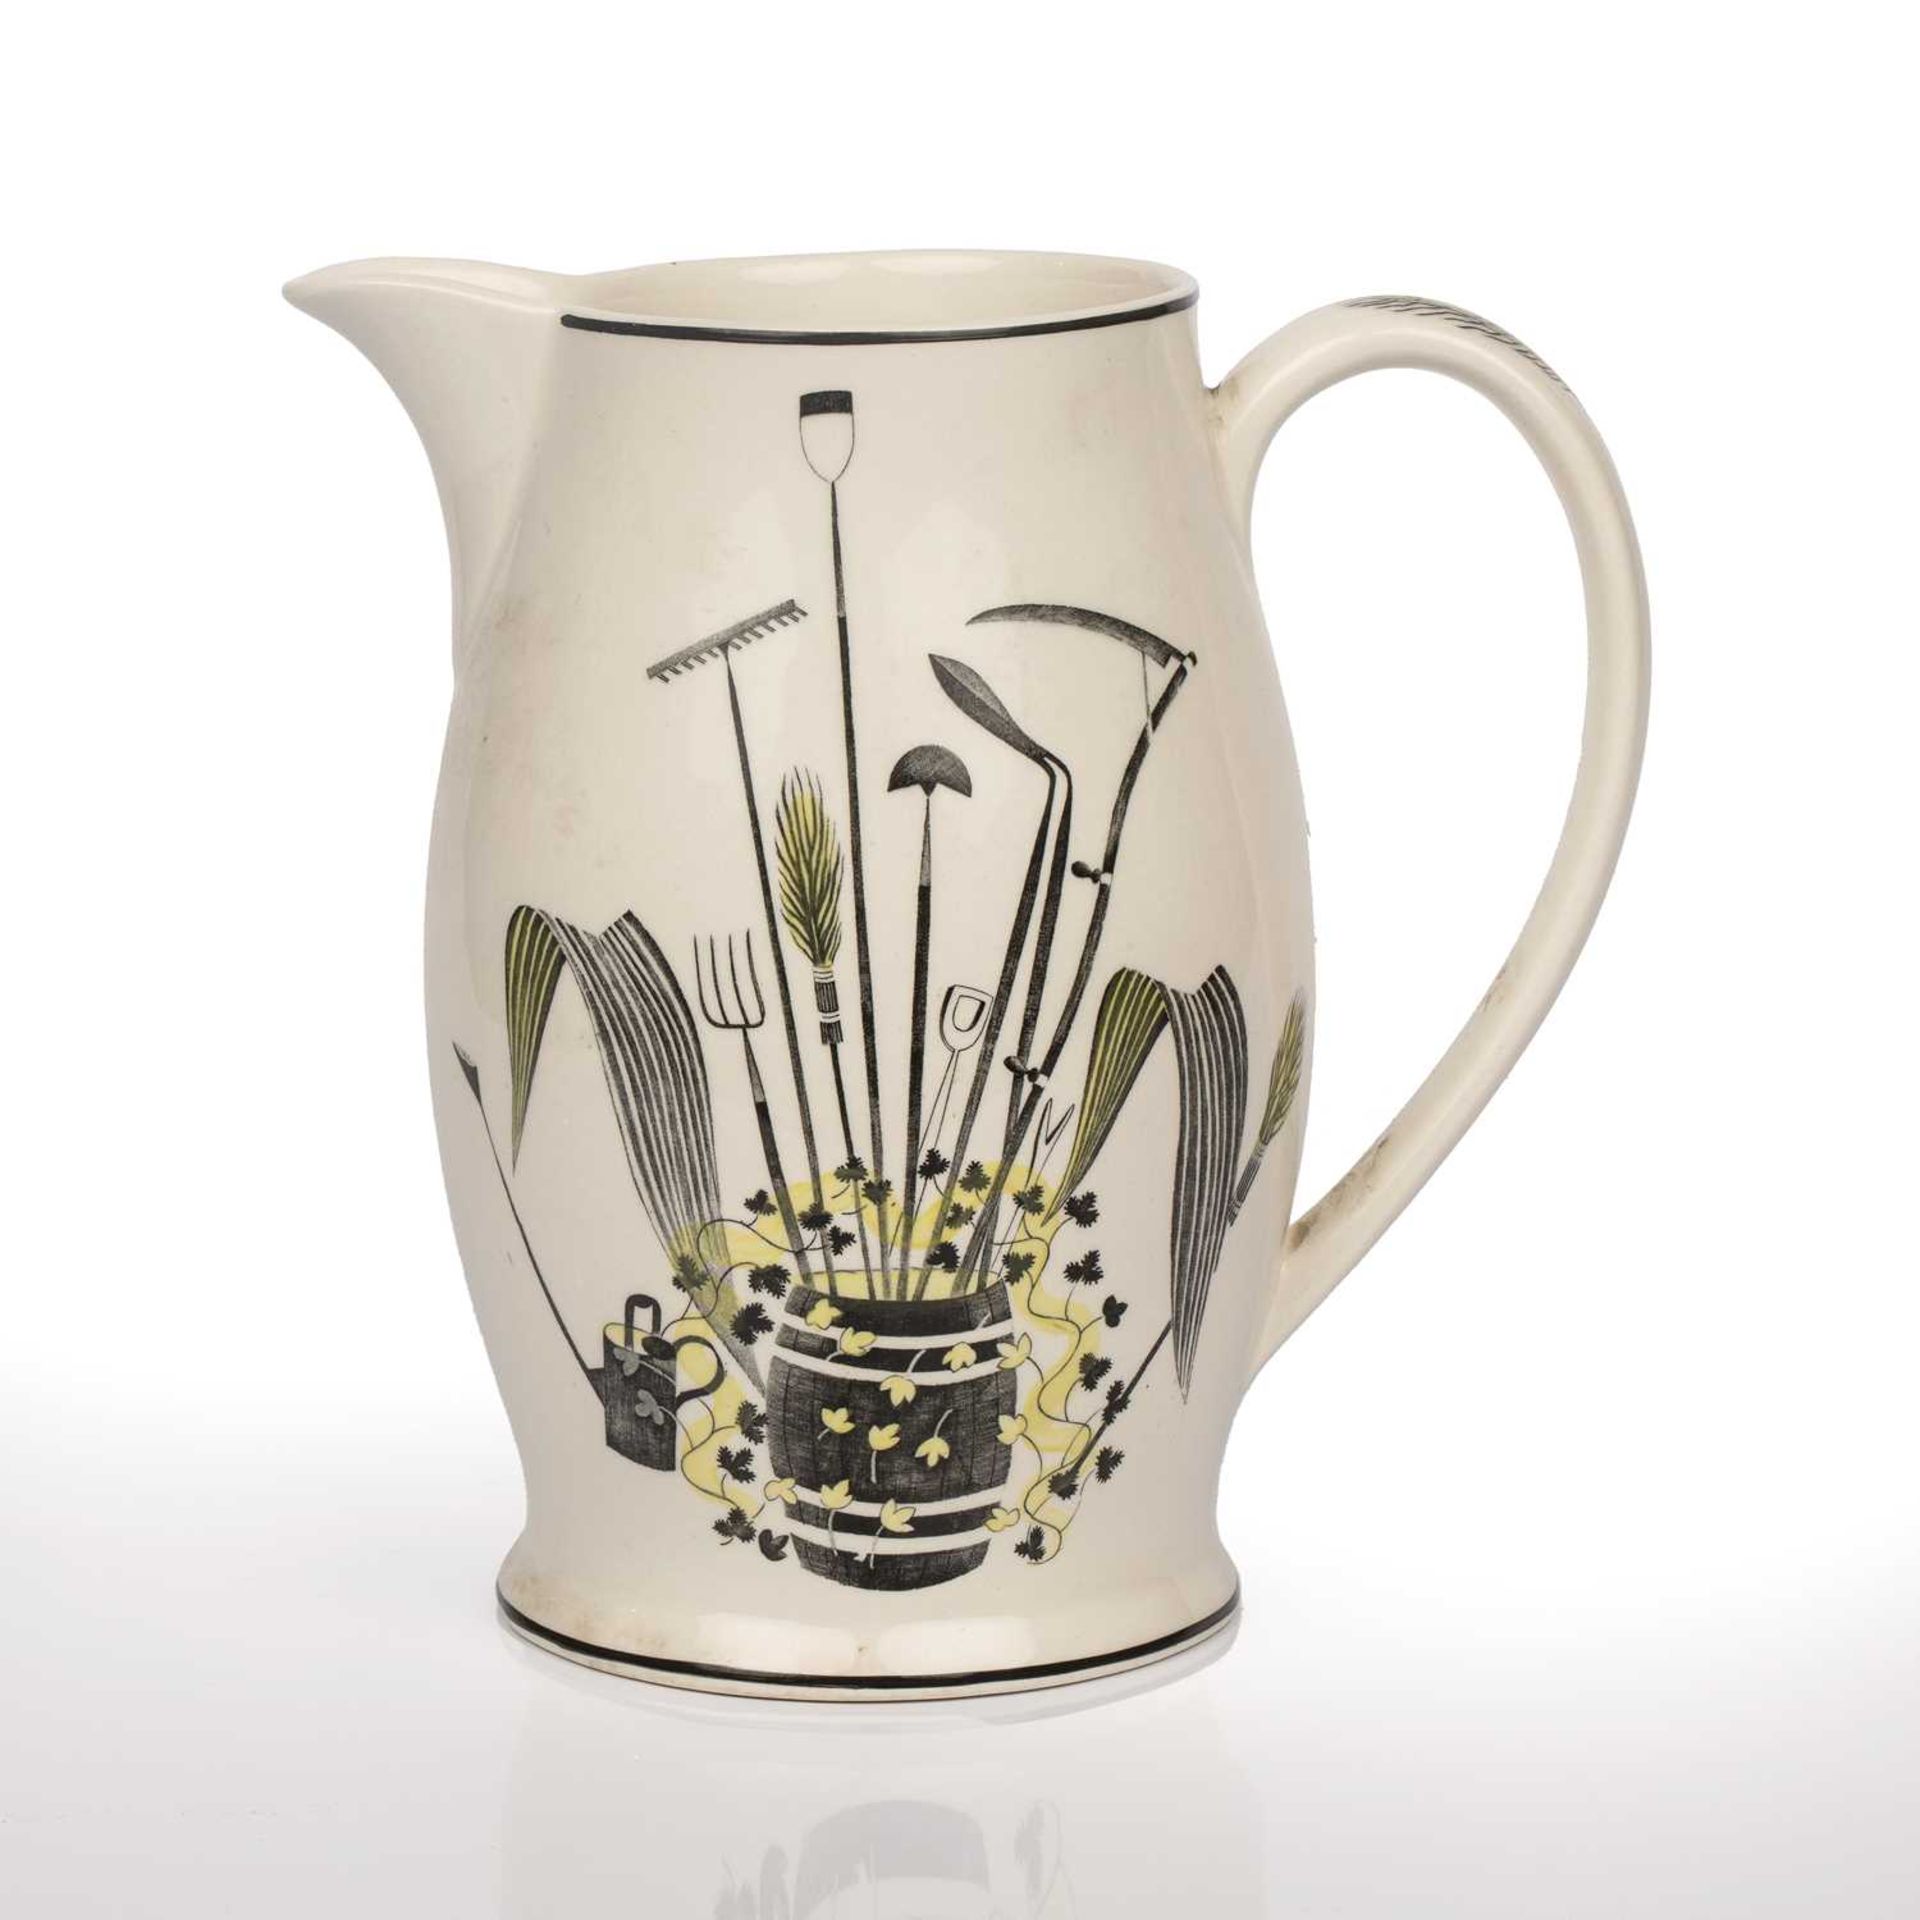 Eric Ravilious (1903-1942) for Wedgwood Garden Implements jug printed marks to the base 'Wedgwood of